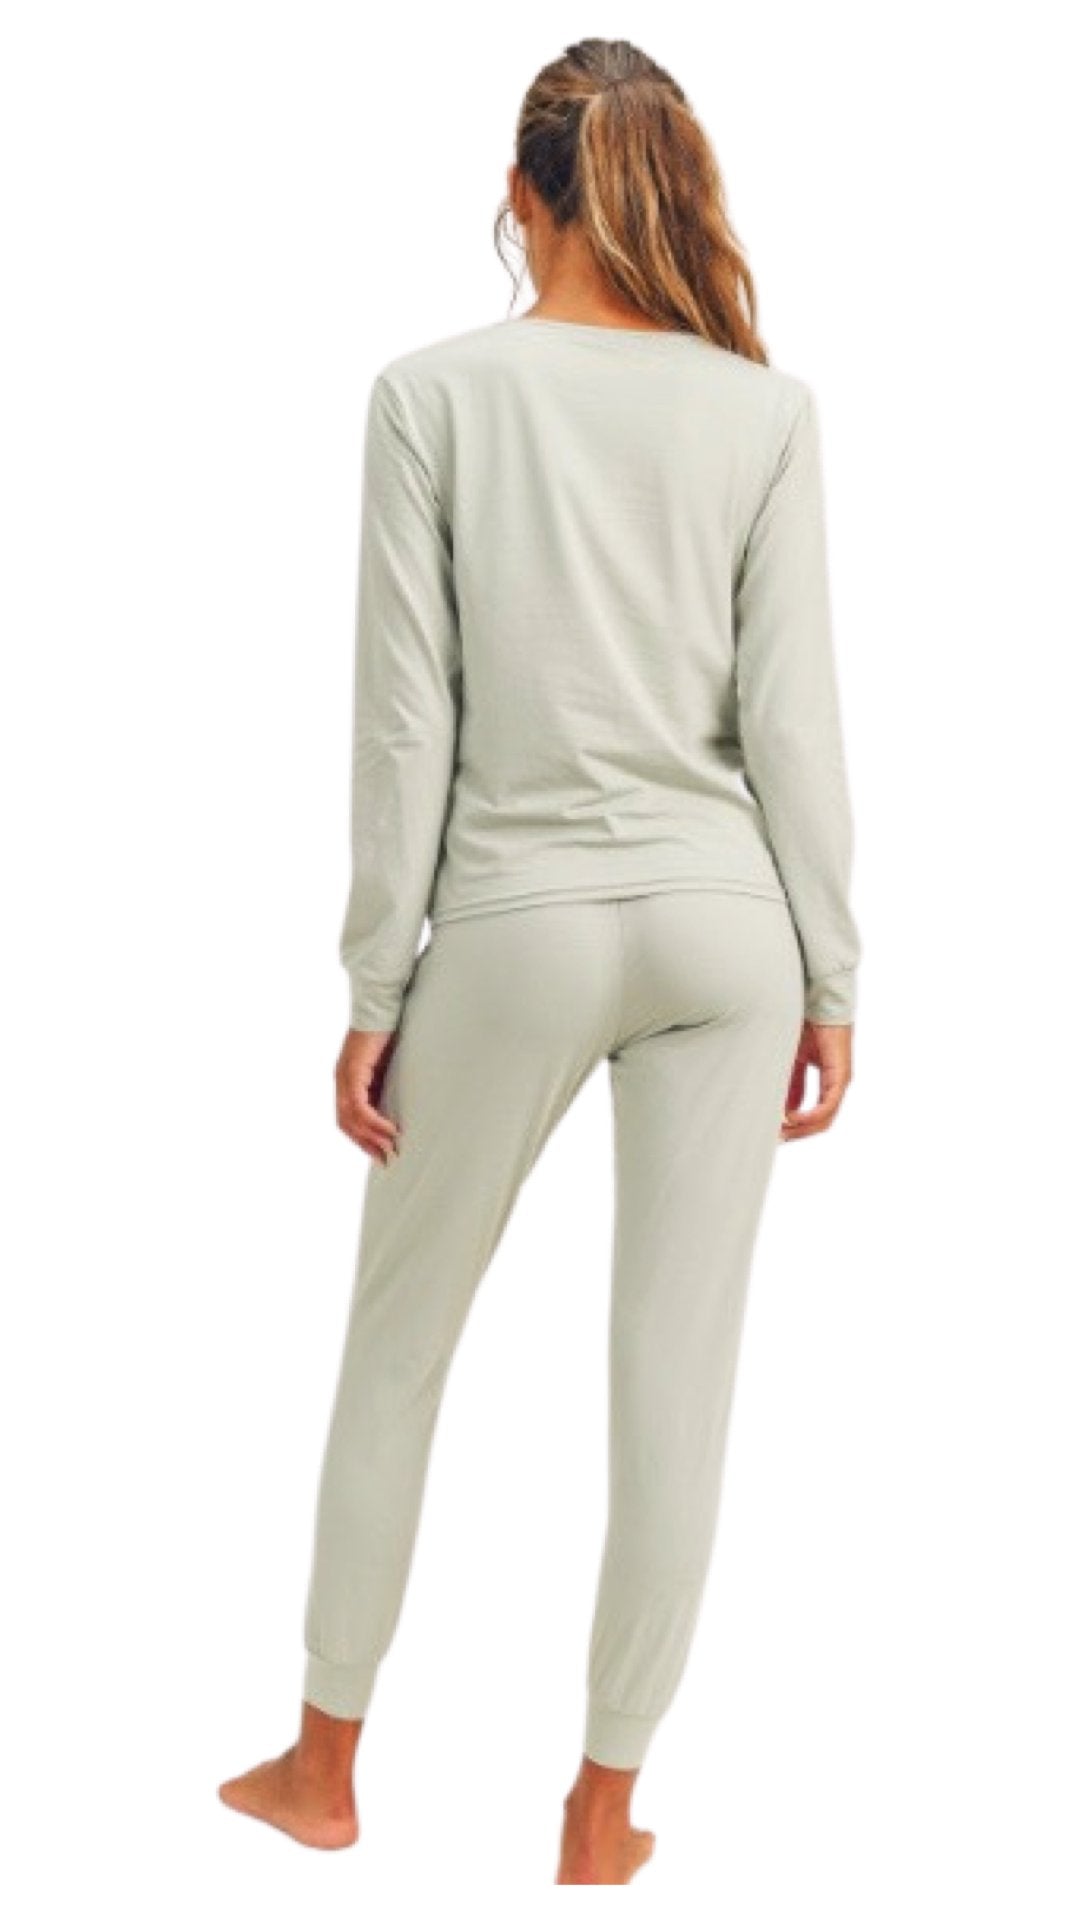 Long Sleeve Top and Lounge Pants Set Green - Model Express Vancouver